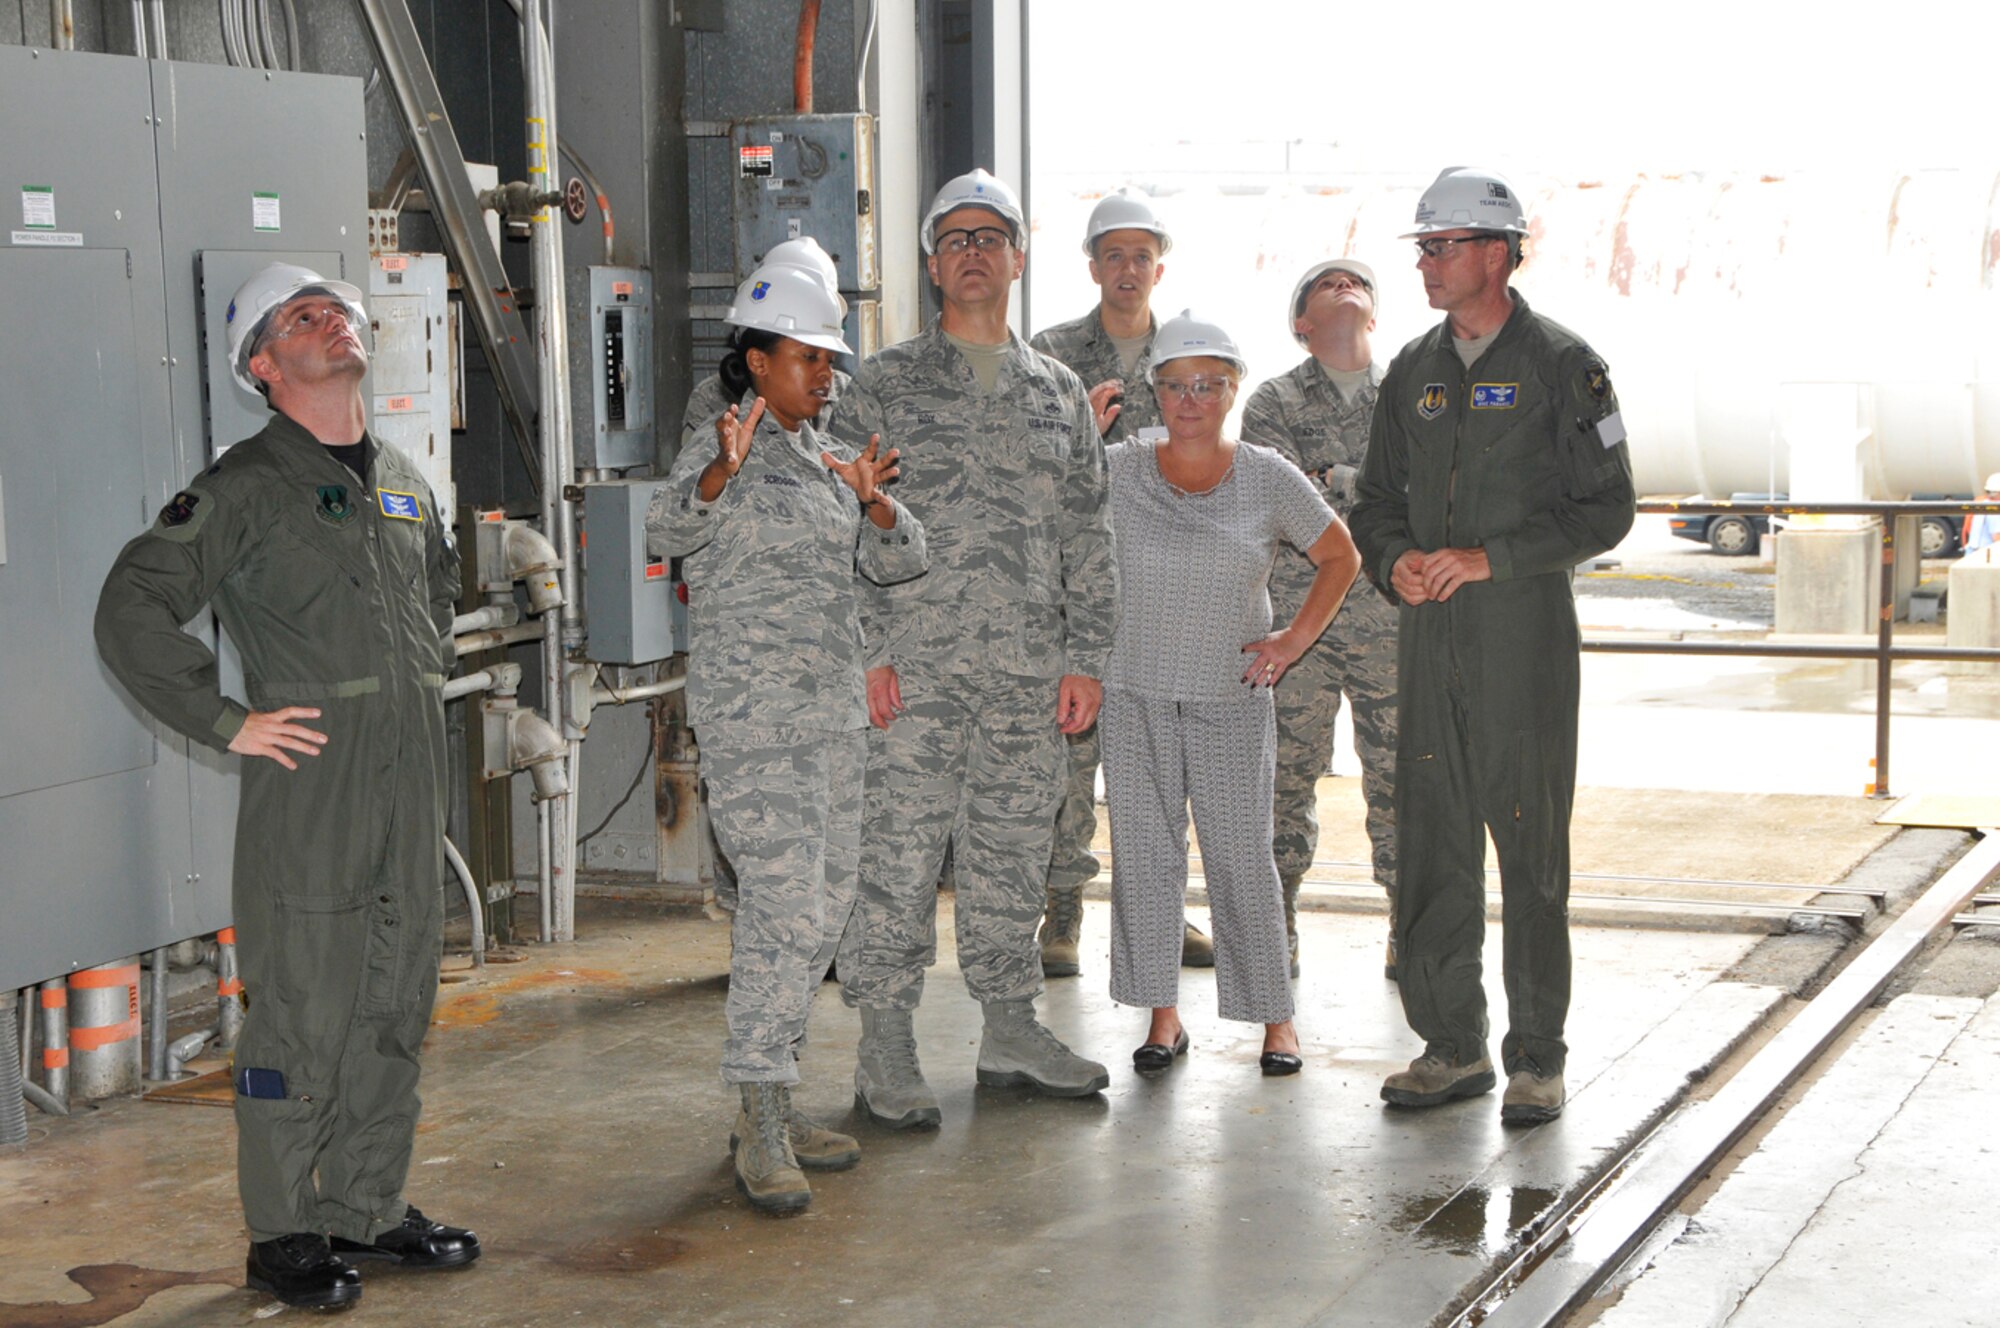 AEDC workers gave Chief Master Sgt. of the Air Force James Roy a tour of base facilities July 15. Chief Roy, the highest enlisted leader in the Air Force, also spoke to the workforce. Pictured from left looking at the size of the base’s 16-foot supersonic wind tunnel are Lt. Col. Lee Davis, 1st Lt. CharMeeka Scroggins, Chief Roy, 1st Lt. John Labouliere, Chief Roy’s wife Paula, 1st Lt. William Edge and AEDC Commander Col. Michael Panarisi. (Photo by Rick Goodfriend)